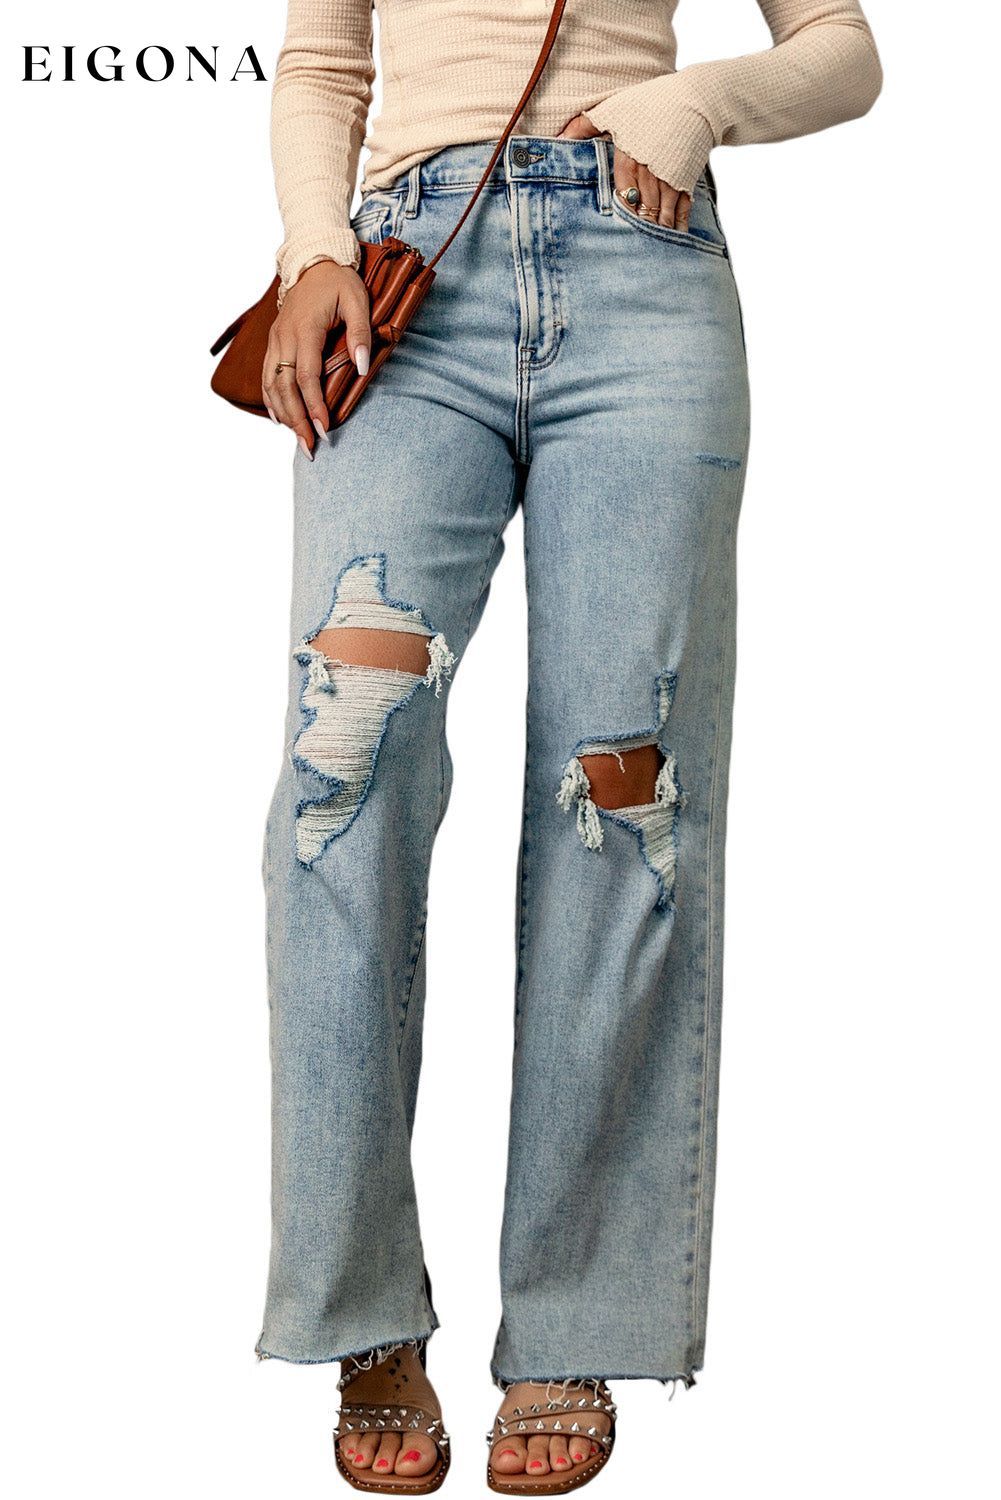 Sky Blue Distressed Frayed Hem Holed Straight Leg Loose Jeans All In Stock bottoms clothes DL Chic DL Exclusive Fabric Denim Jeans Occasion Daily pants Print Solid Color Season Fall & Autumn Season Spring Style Casual Women's Bottoms